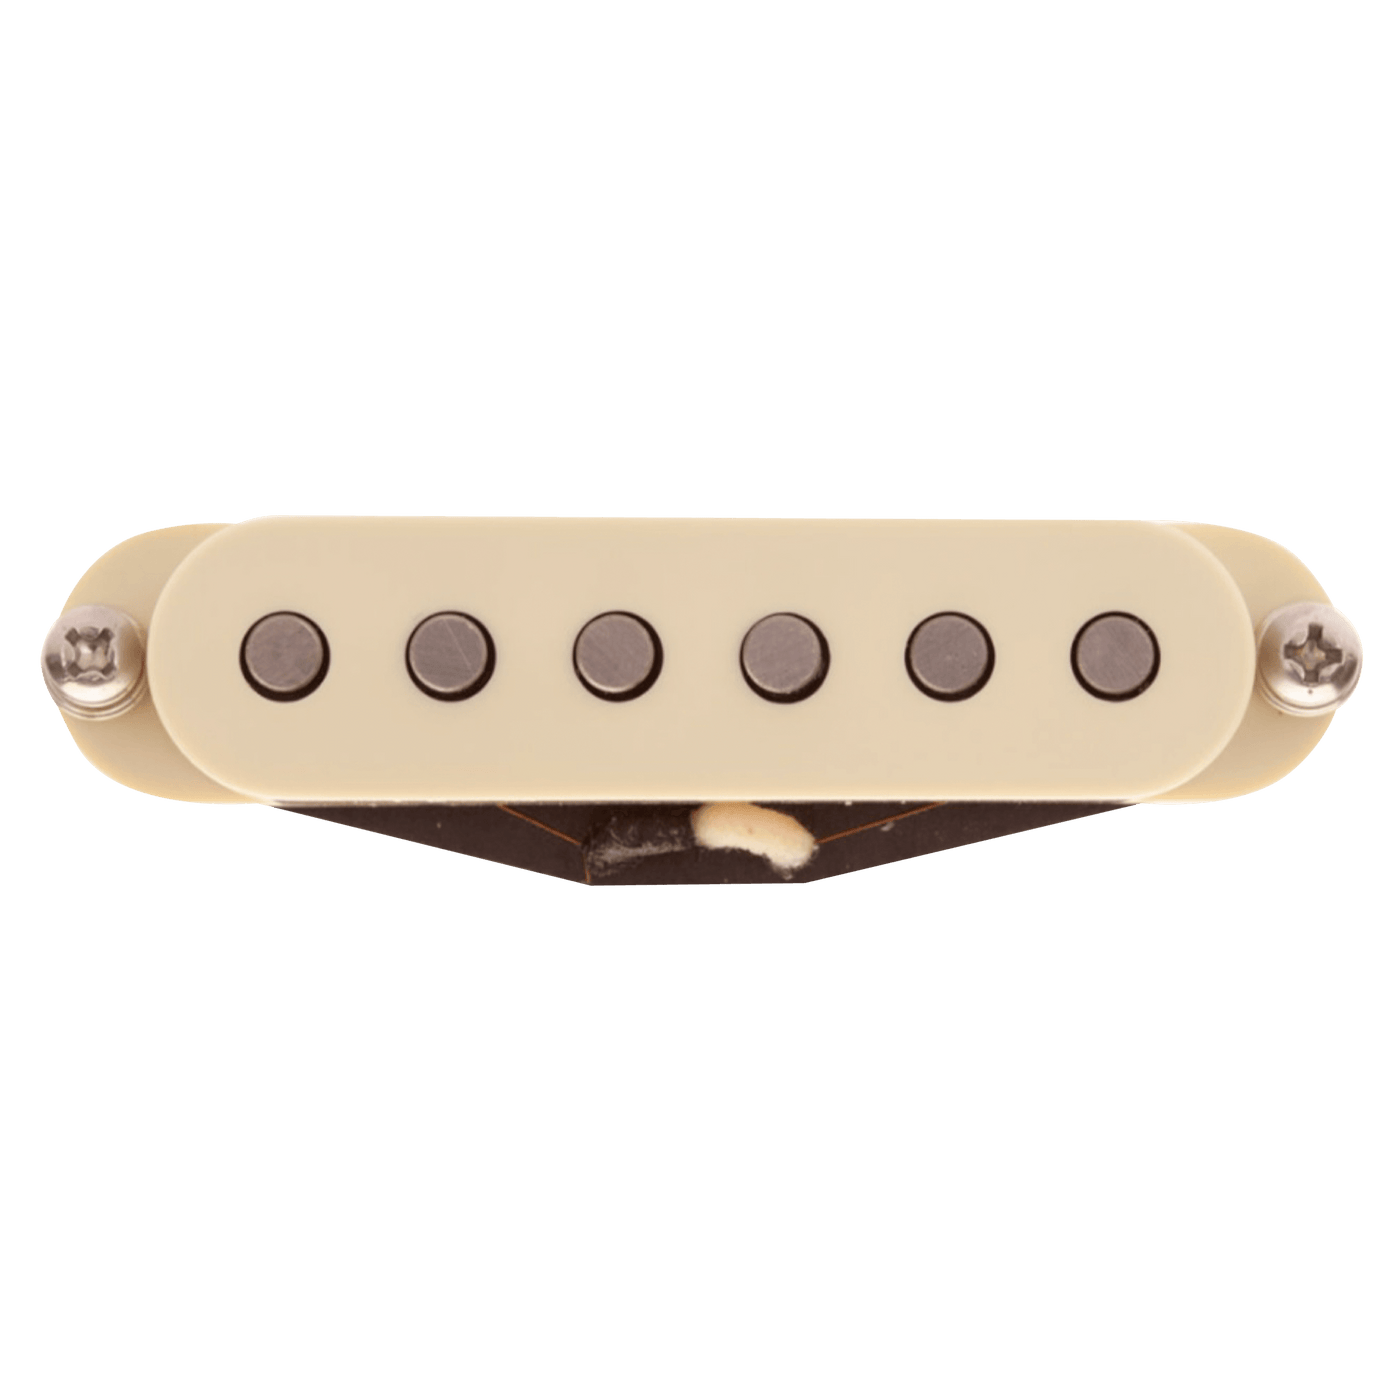 Suhr V63 Parchment (Bridge) - $129990 - Gearhub - Suhr’s V63 pickups are wound to have the same tonal characteristics as those found by John Suhr in a particularly sweet 1963 S type guitar. The magnets are made by the same company that made the magnets for Fender® in the early 60’s and have the exact same formulation and use the same manufacturing process. Magnet • Alnico V Special DC Resistance • 6.4K Ω RW/RP Hook Up Wire • Braided Cloth Covers • Parchment